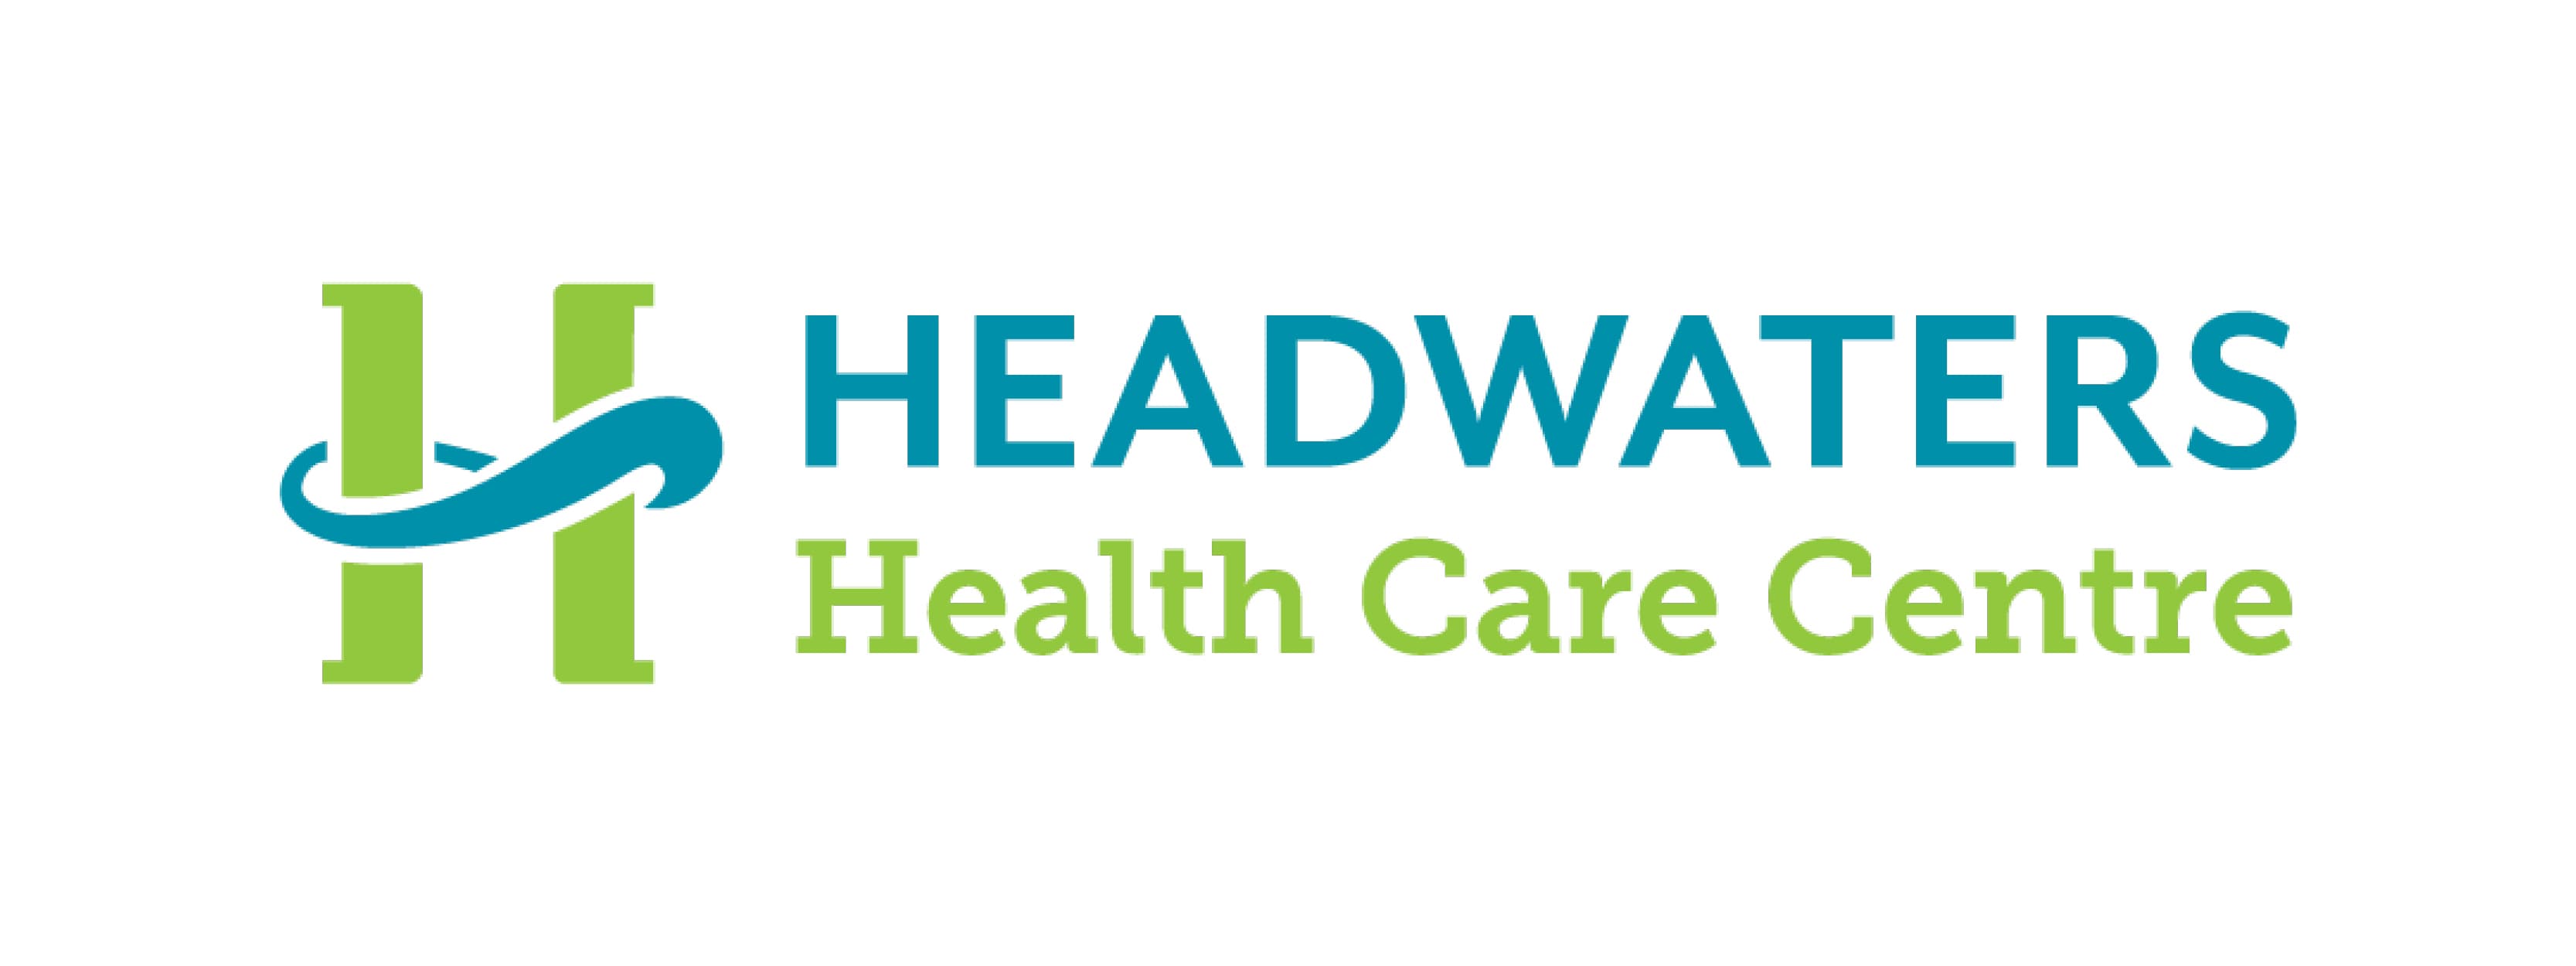 Headwaters Health Care Centre